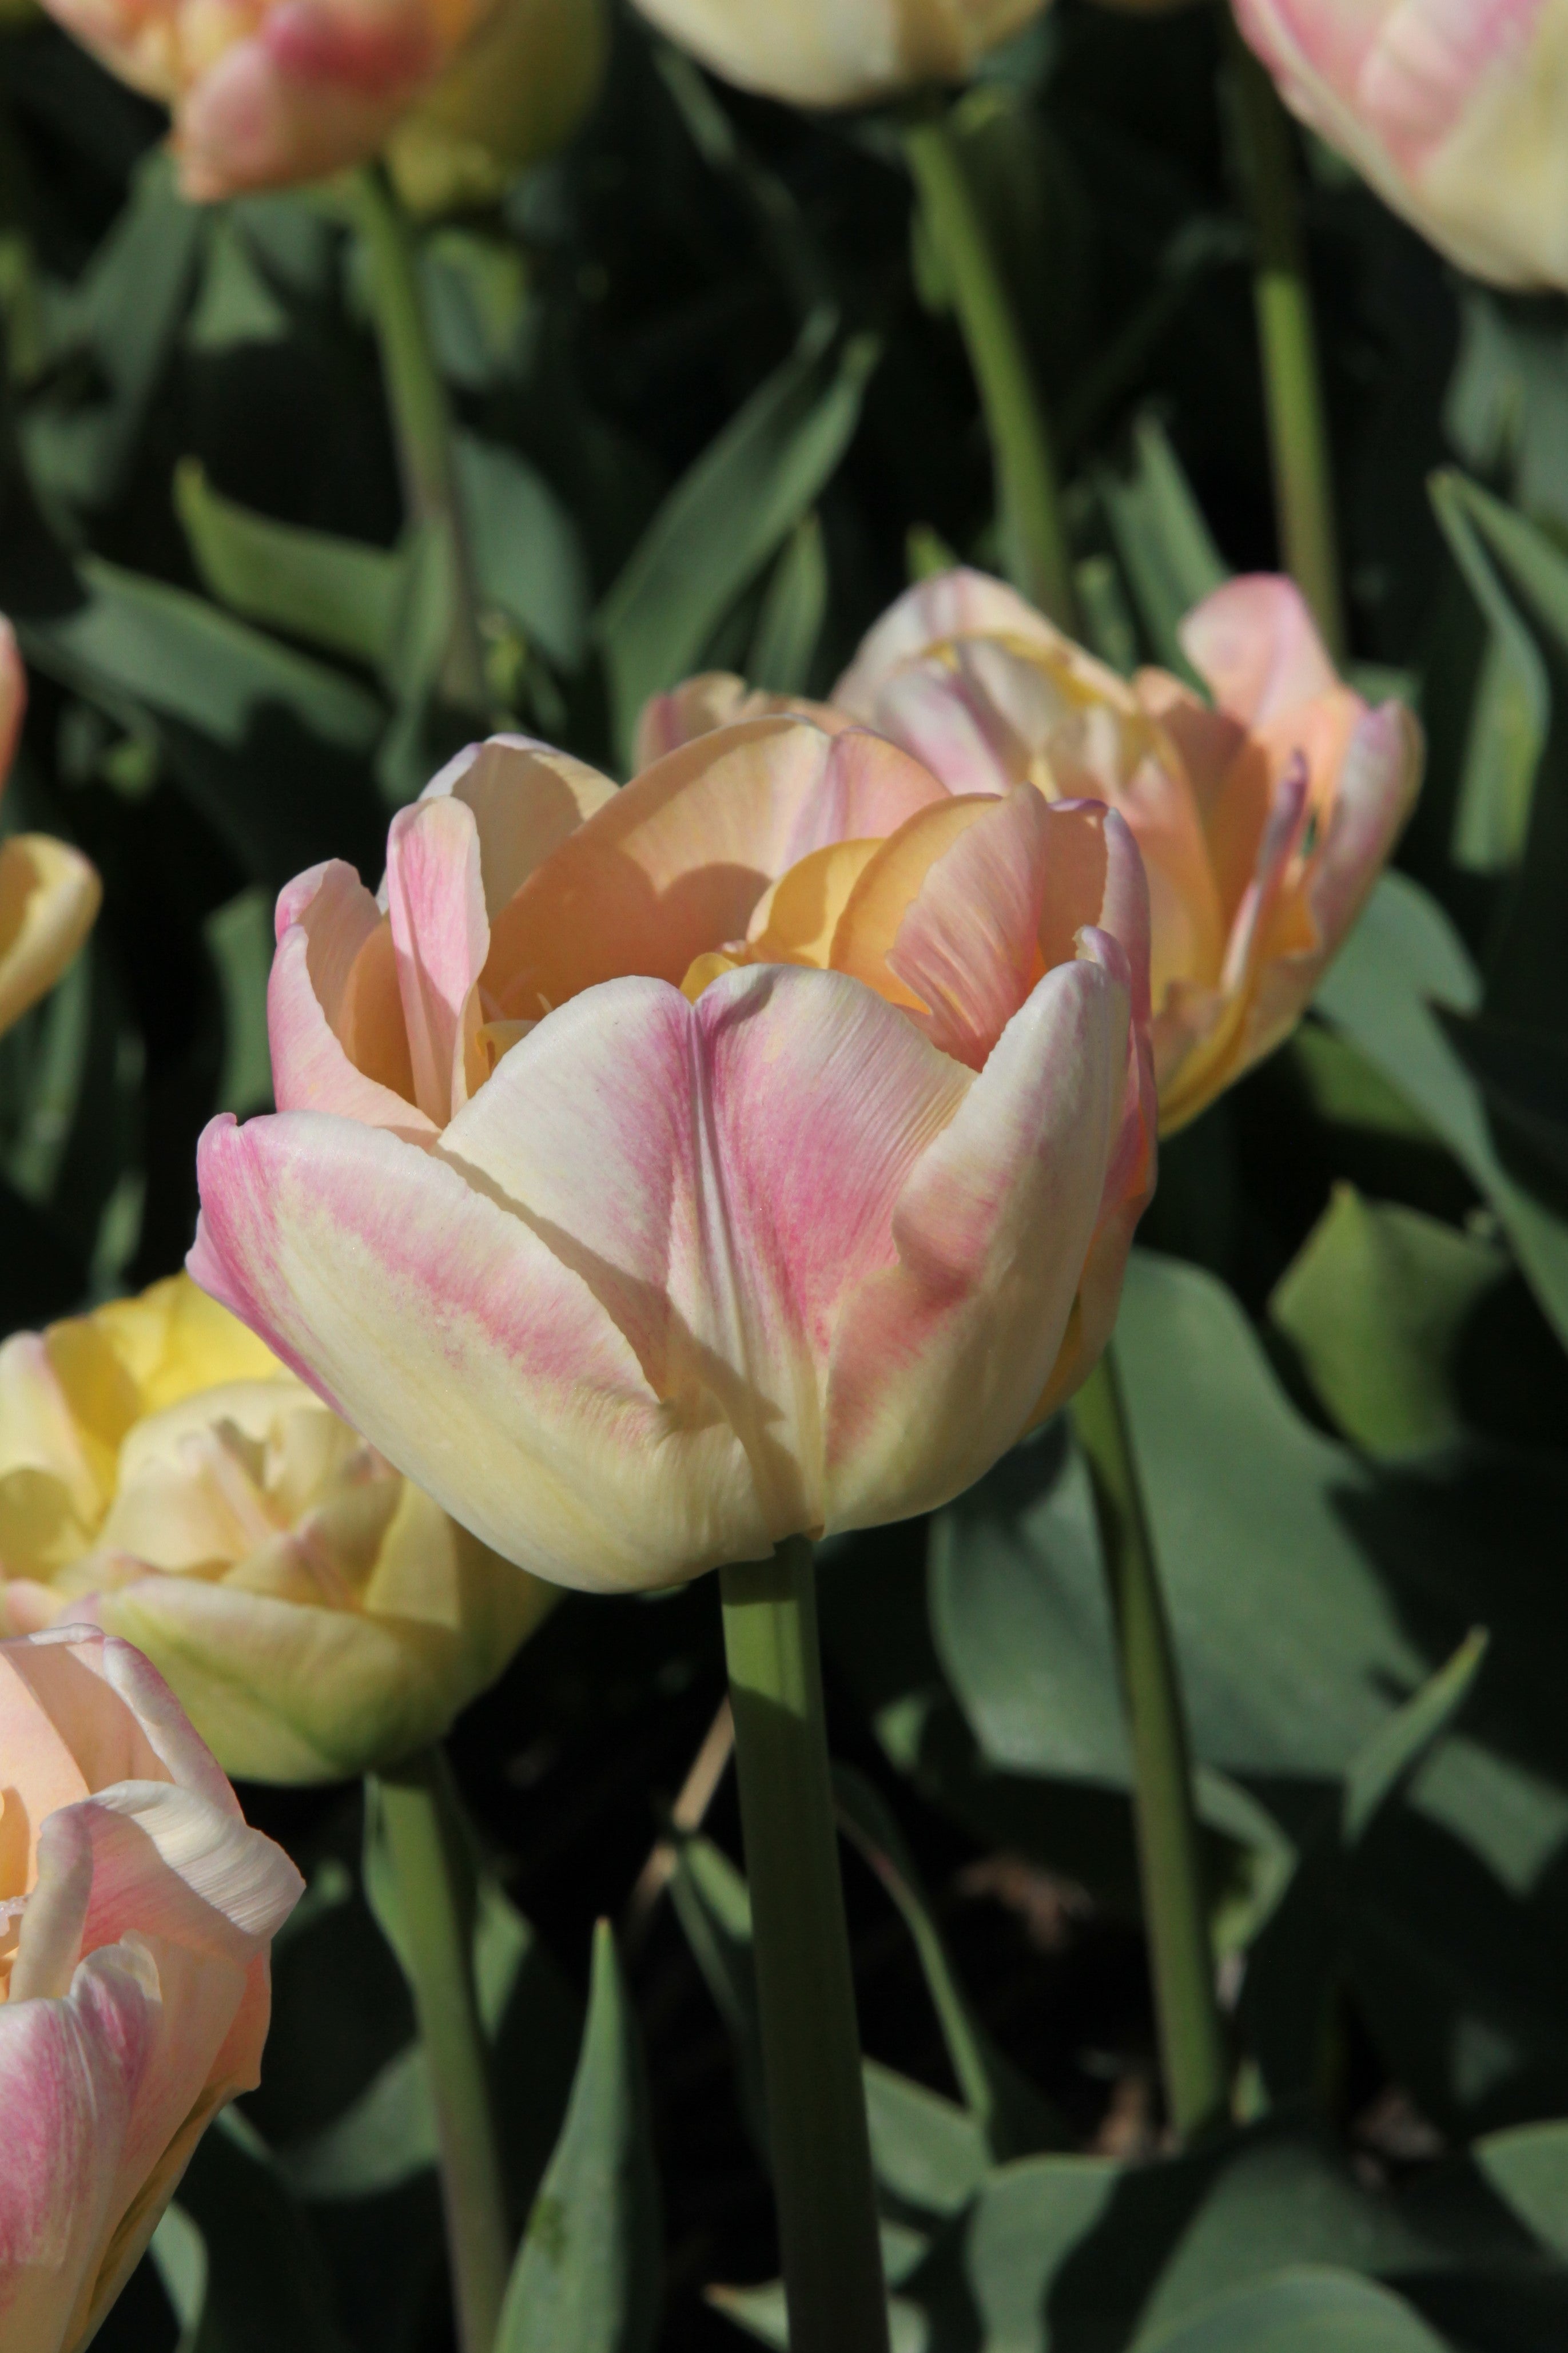 Double late tulip creme upstar with pastel yellow and pink petals